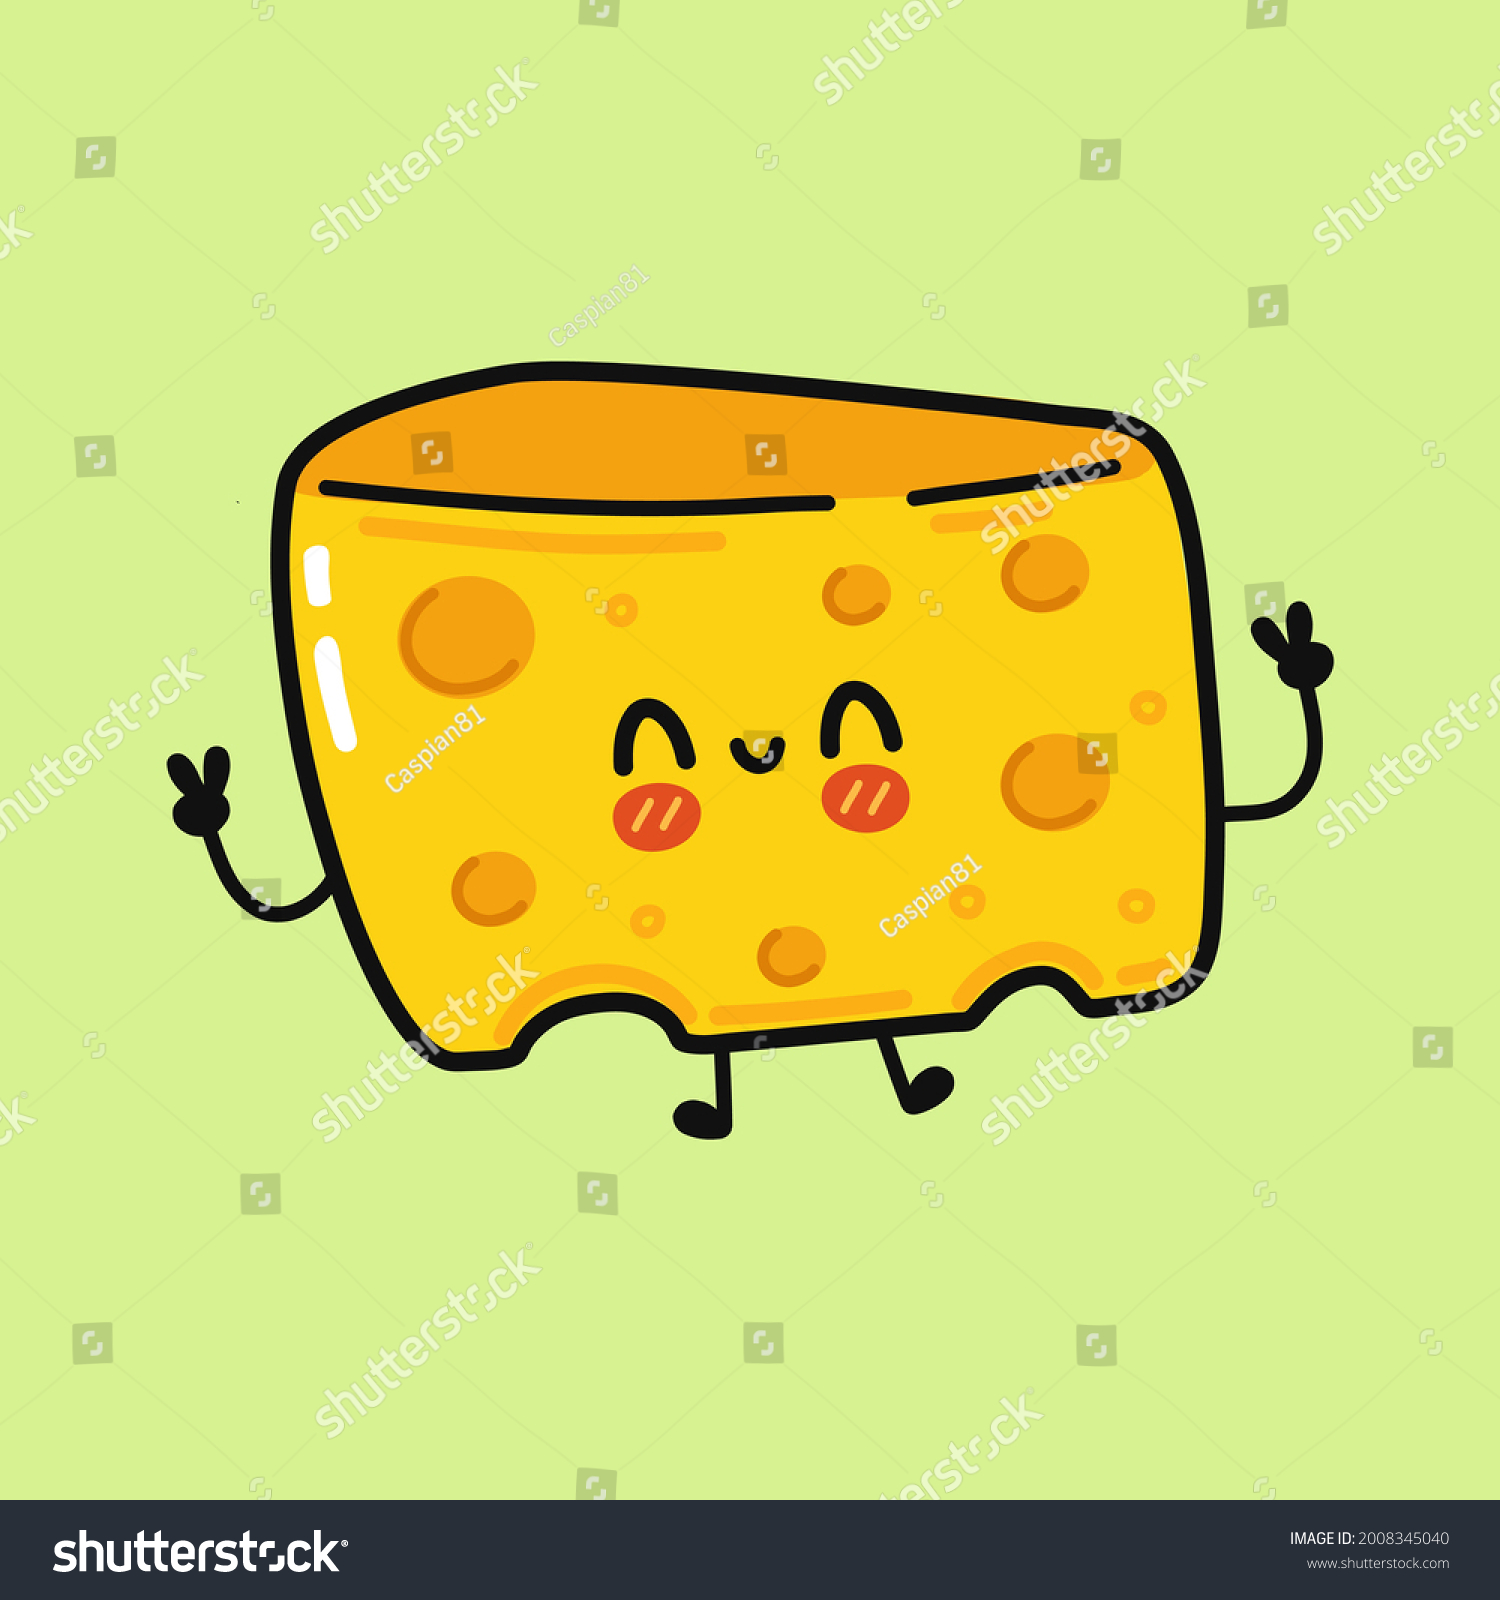 SVG of Cute funny cheese character,milk food,kids,baby cpncept.Vector hand drawn doodle line cartoon kawaii character illustration icon.Funny happy cheese character,cartoon healthy milk food,kids art concept svg